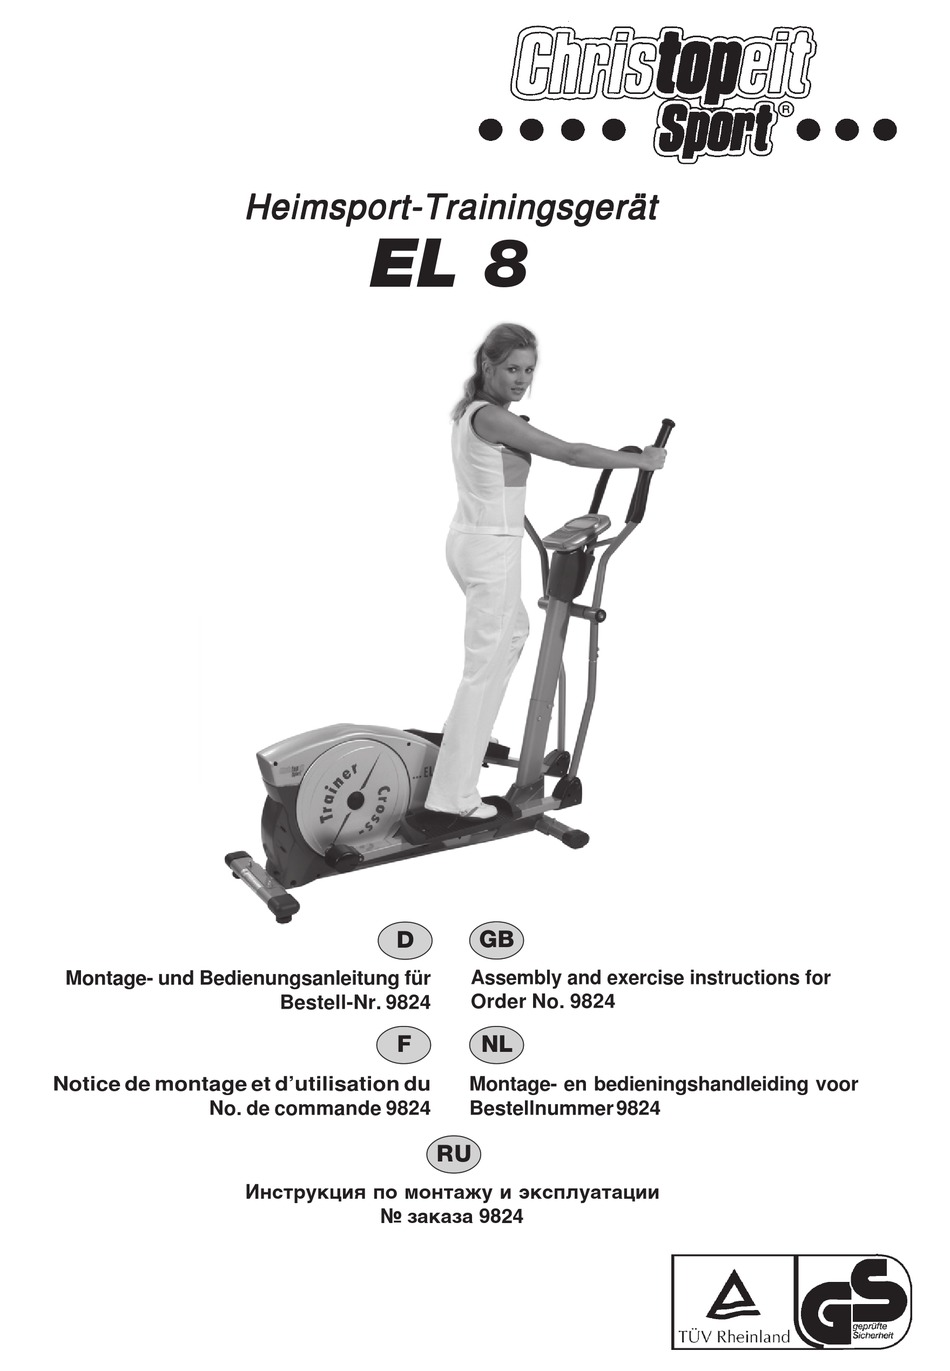 Destructief cafe Trouwens Einzelteileübersicht; Summary Of Parts - Christopeit Sport EL 8 Assembly  And Exercise Instructions [Page 3] | ManualsLib